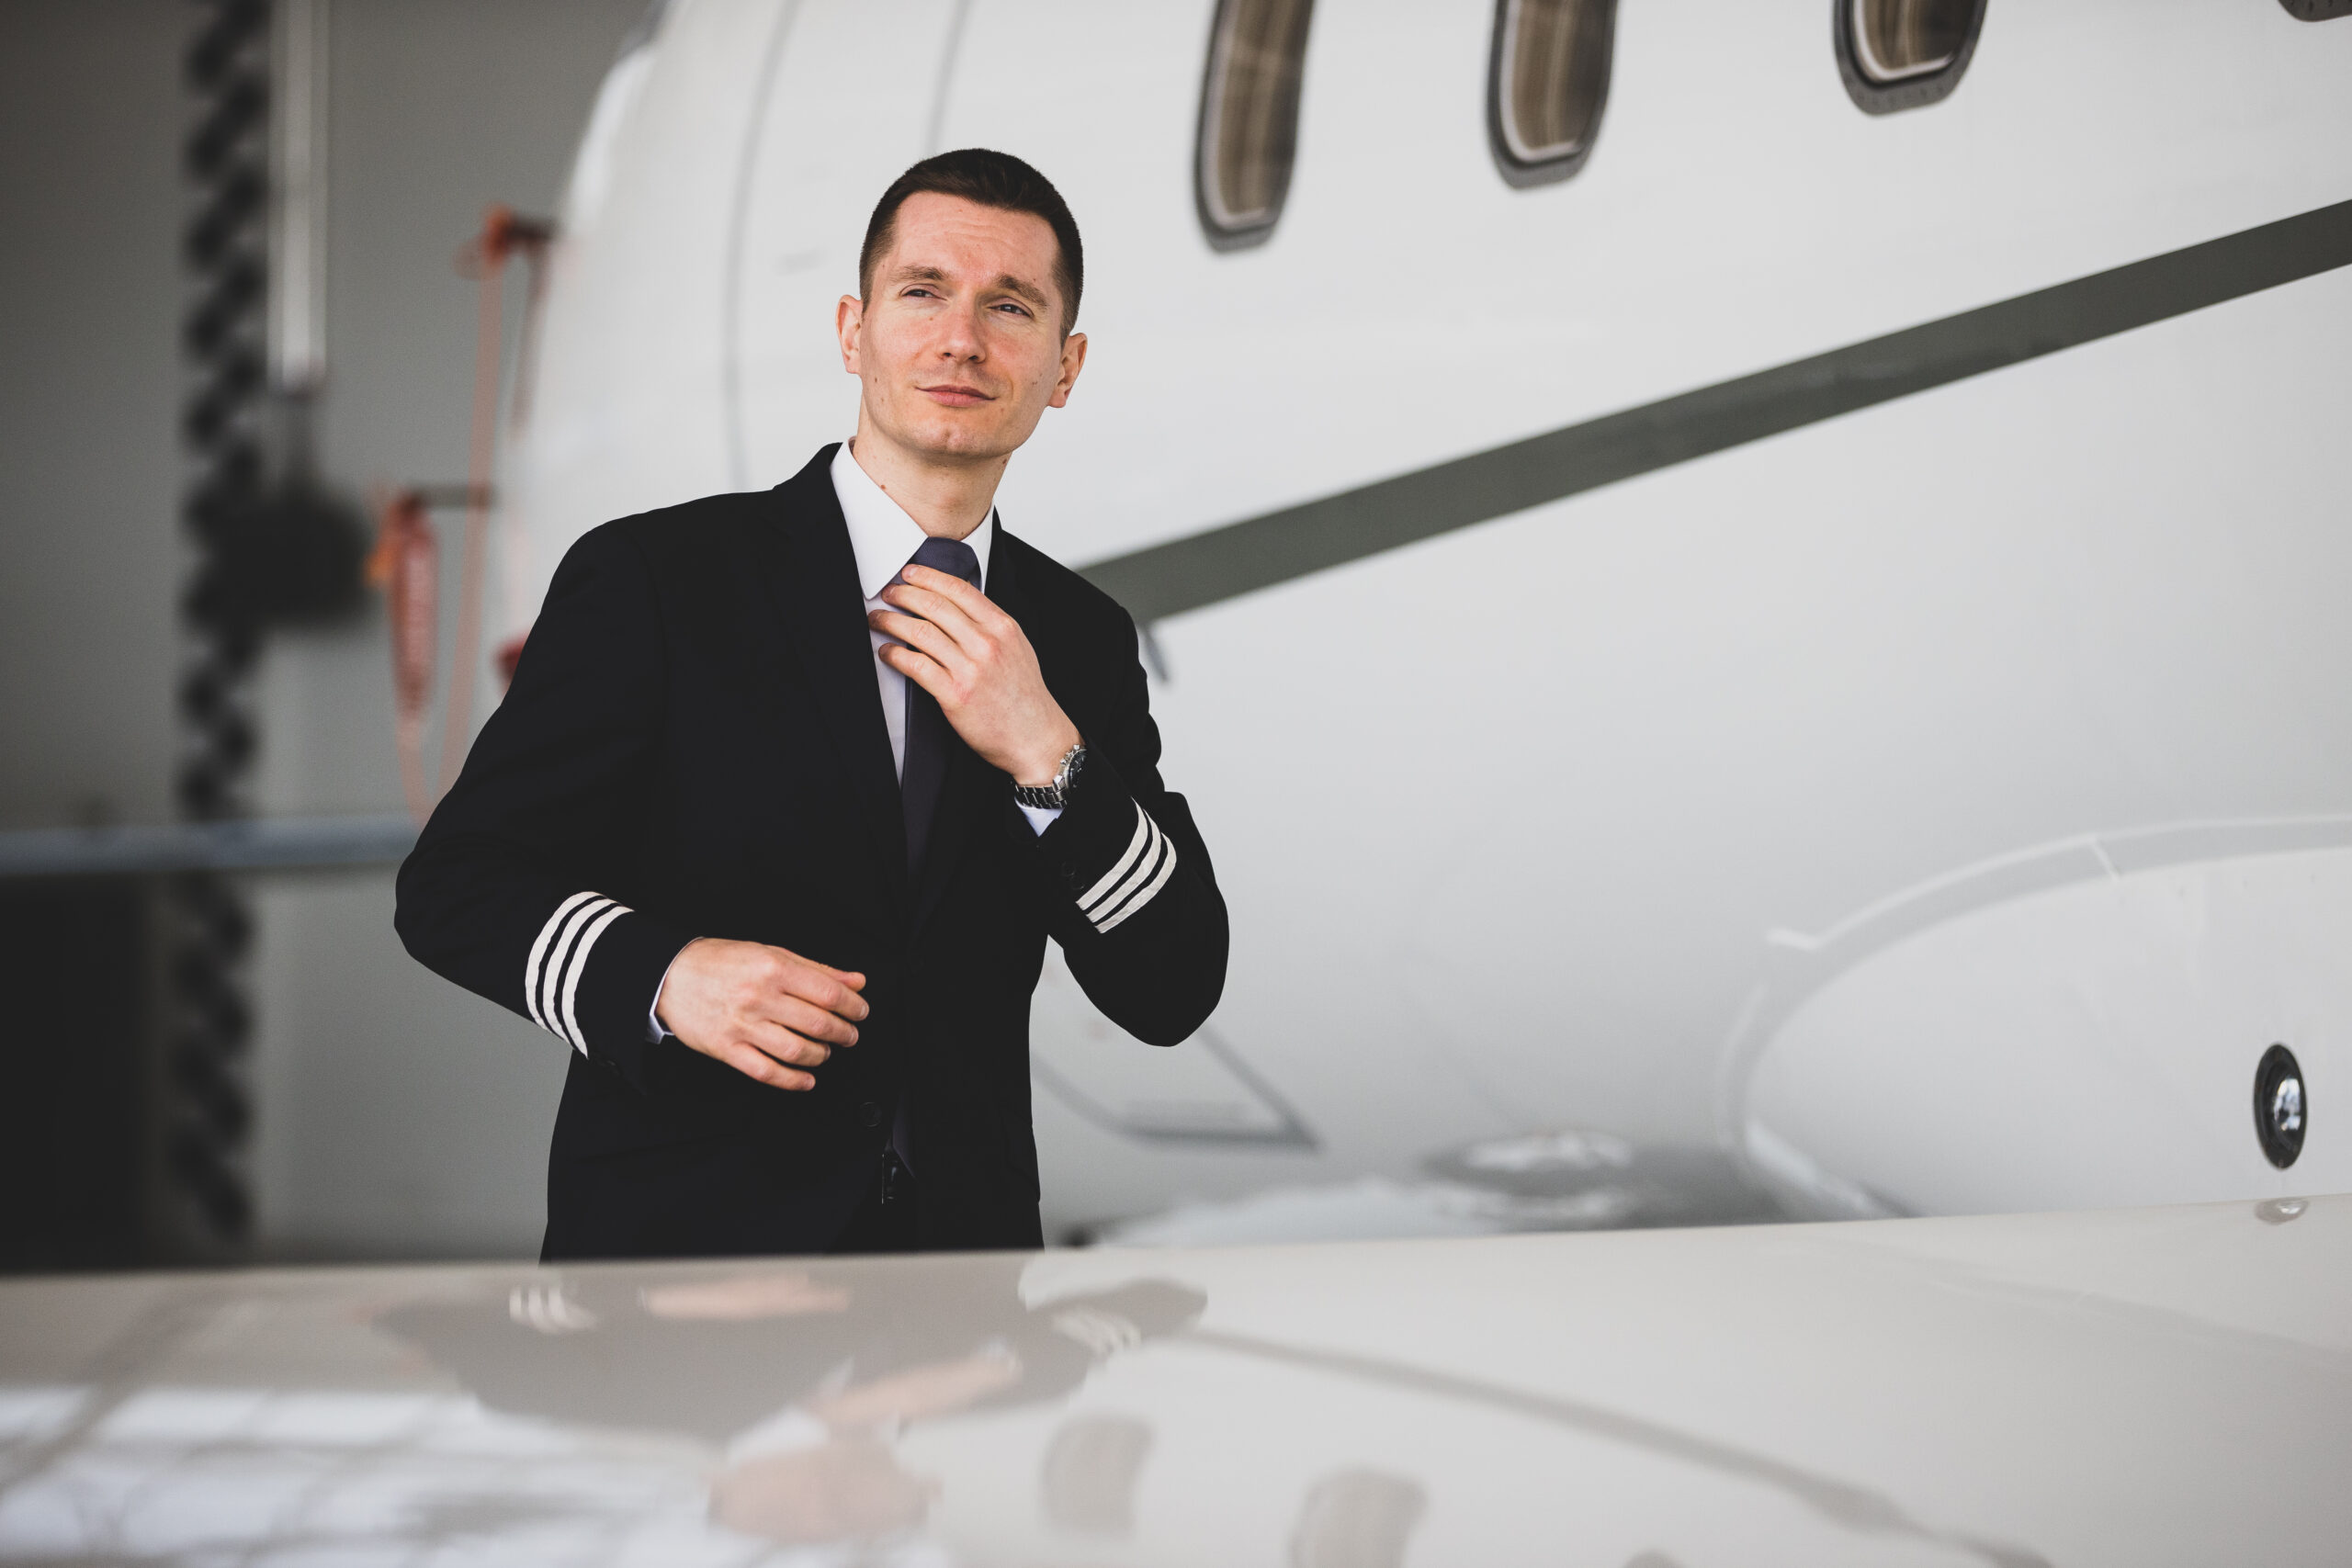 Charter flights – who should you trust?